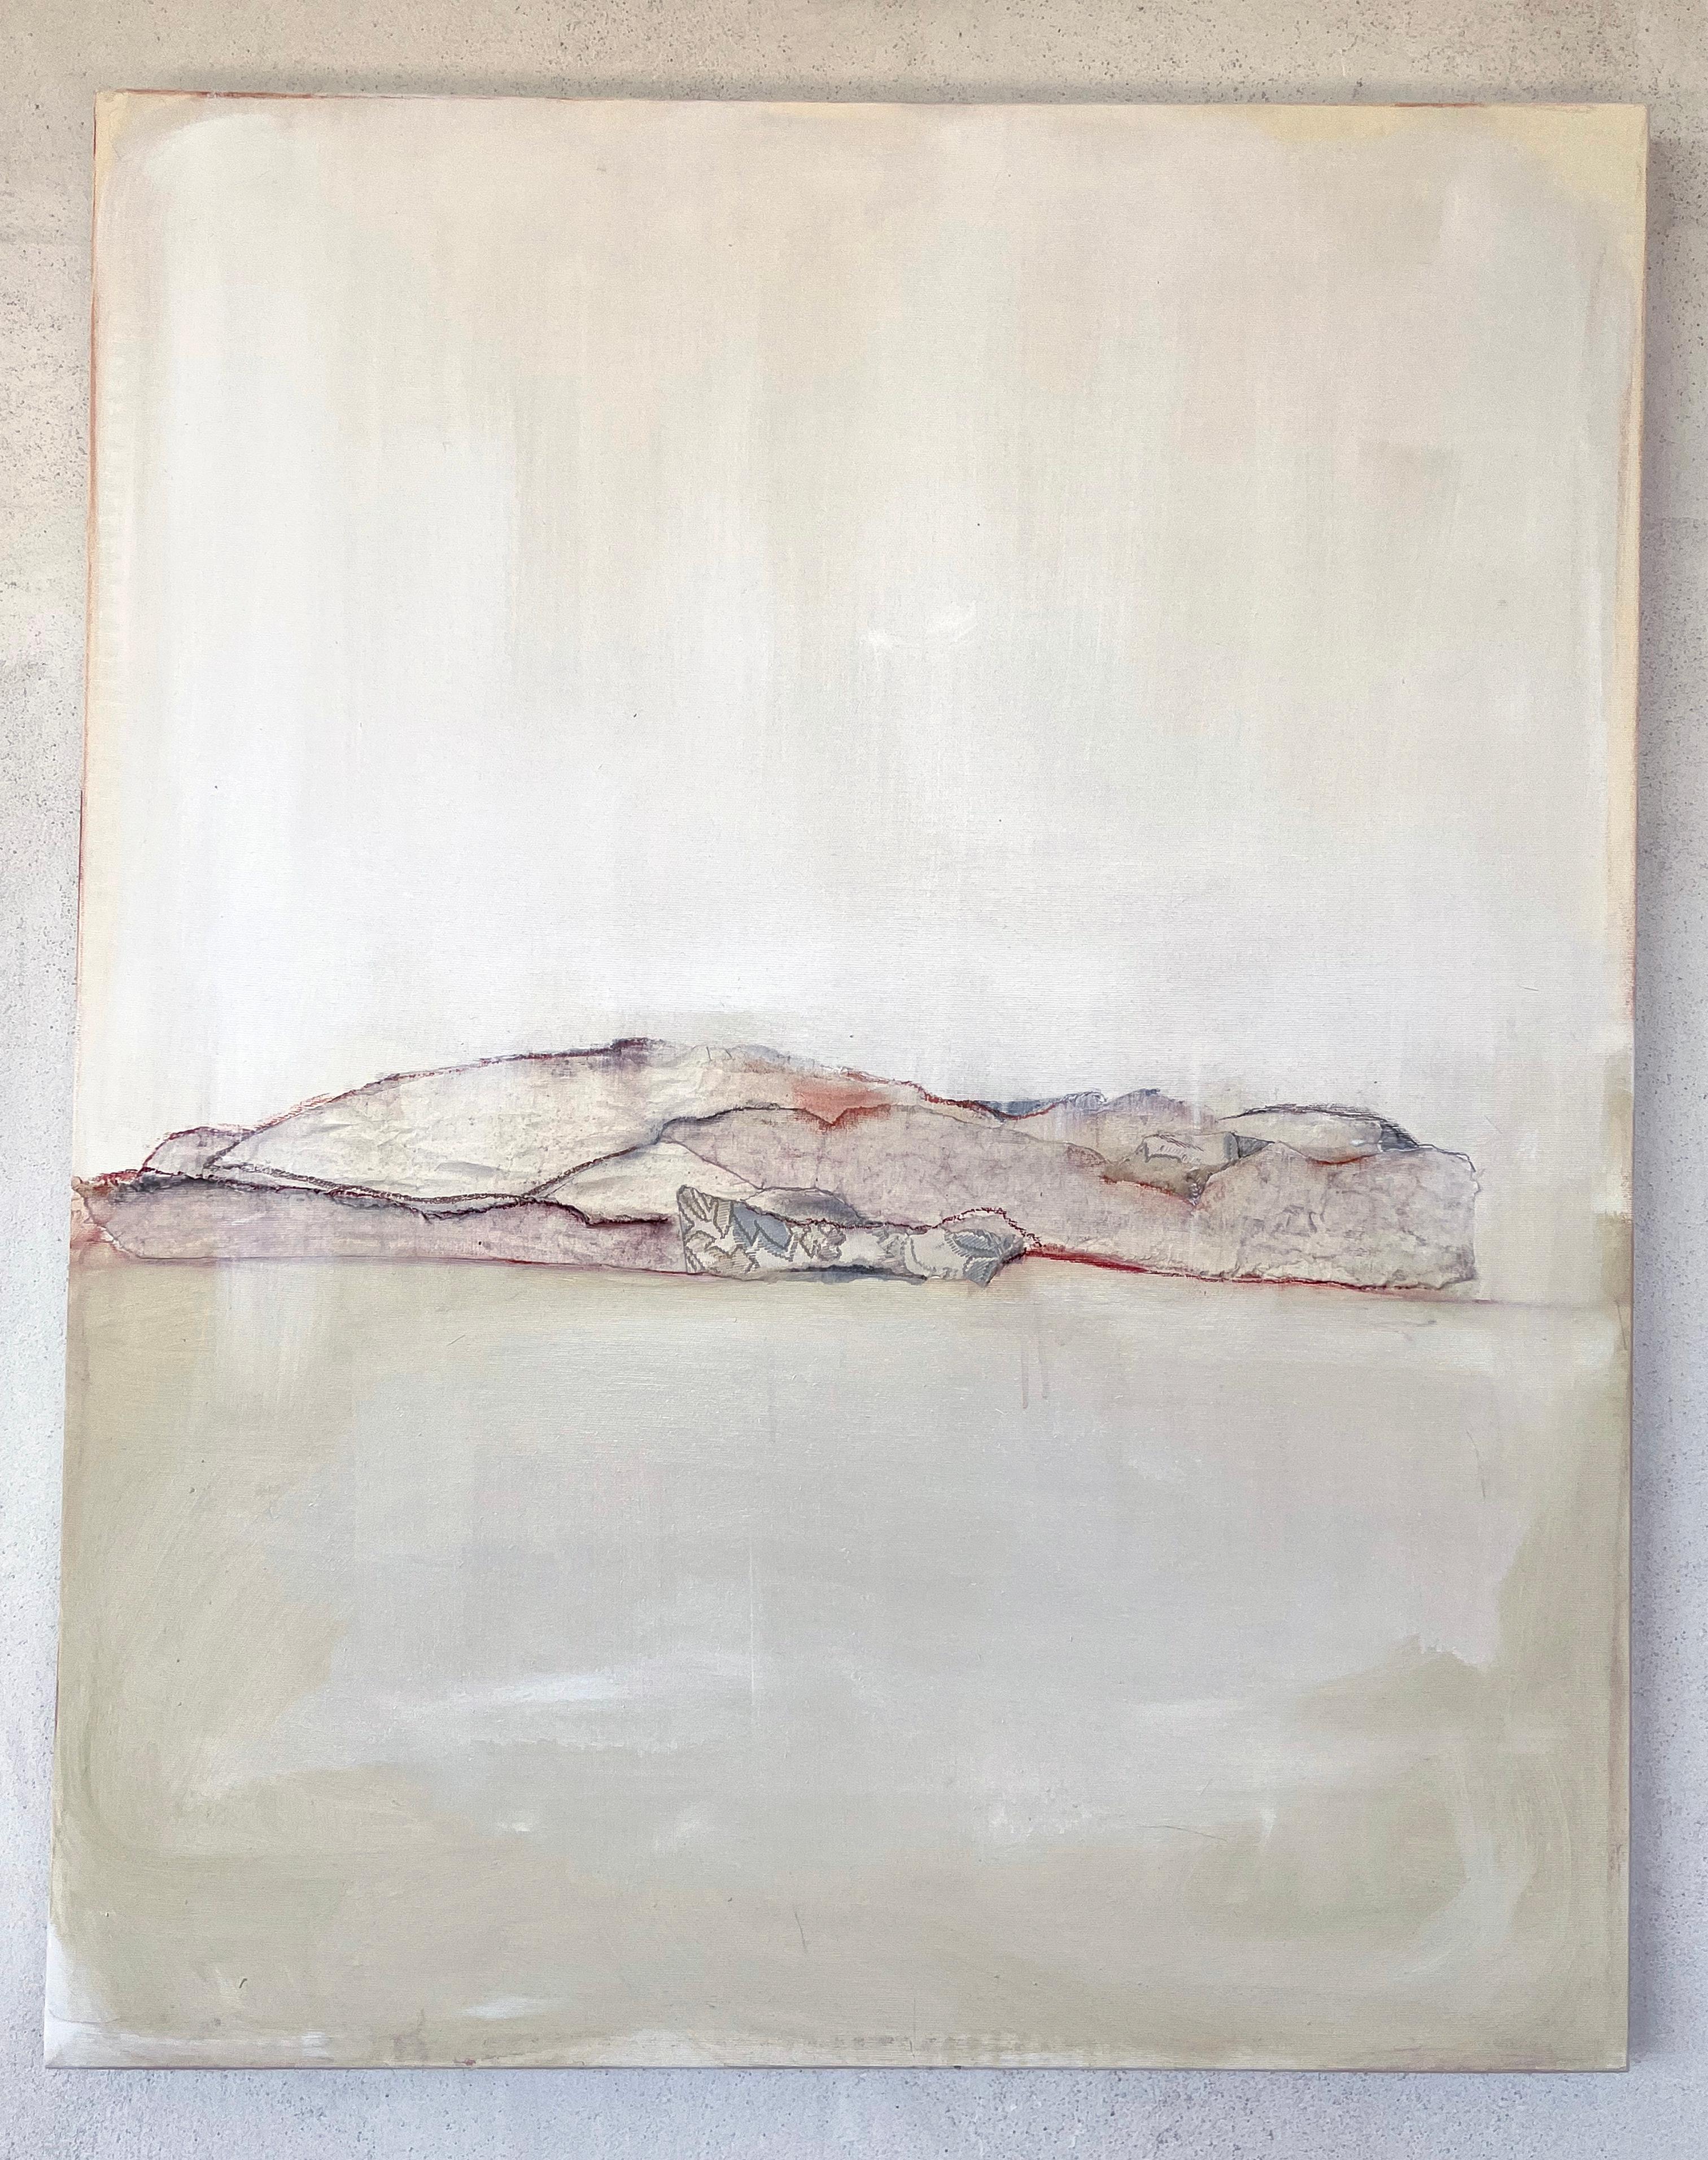 Landscape 
Abstract 
80x100 cm
Ready to Hang
one of a kind
Shipped with certificate of authenticity and signed on the back


Marilina Marchica, born in 1984, was born in Agrigento, where she lives and works. She graduated in Painting at the Academy